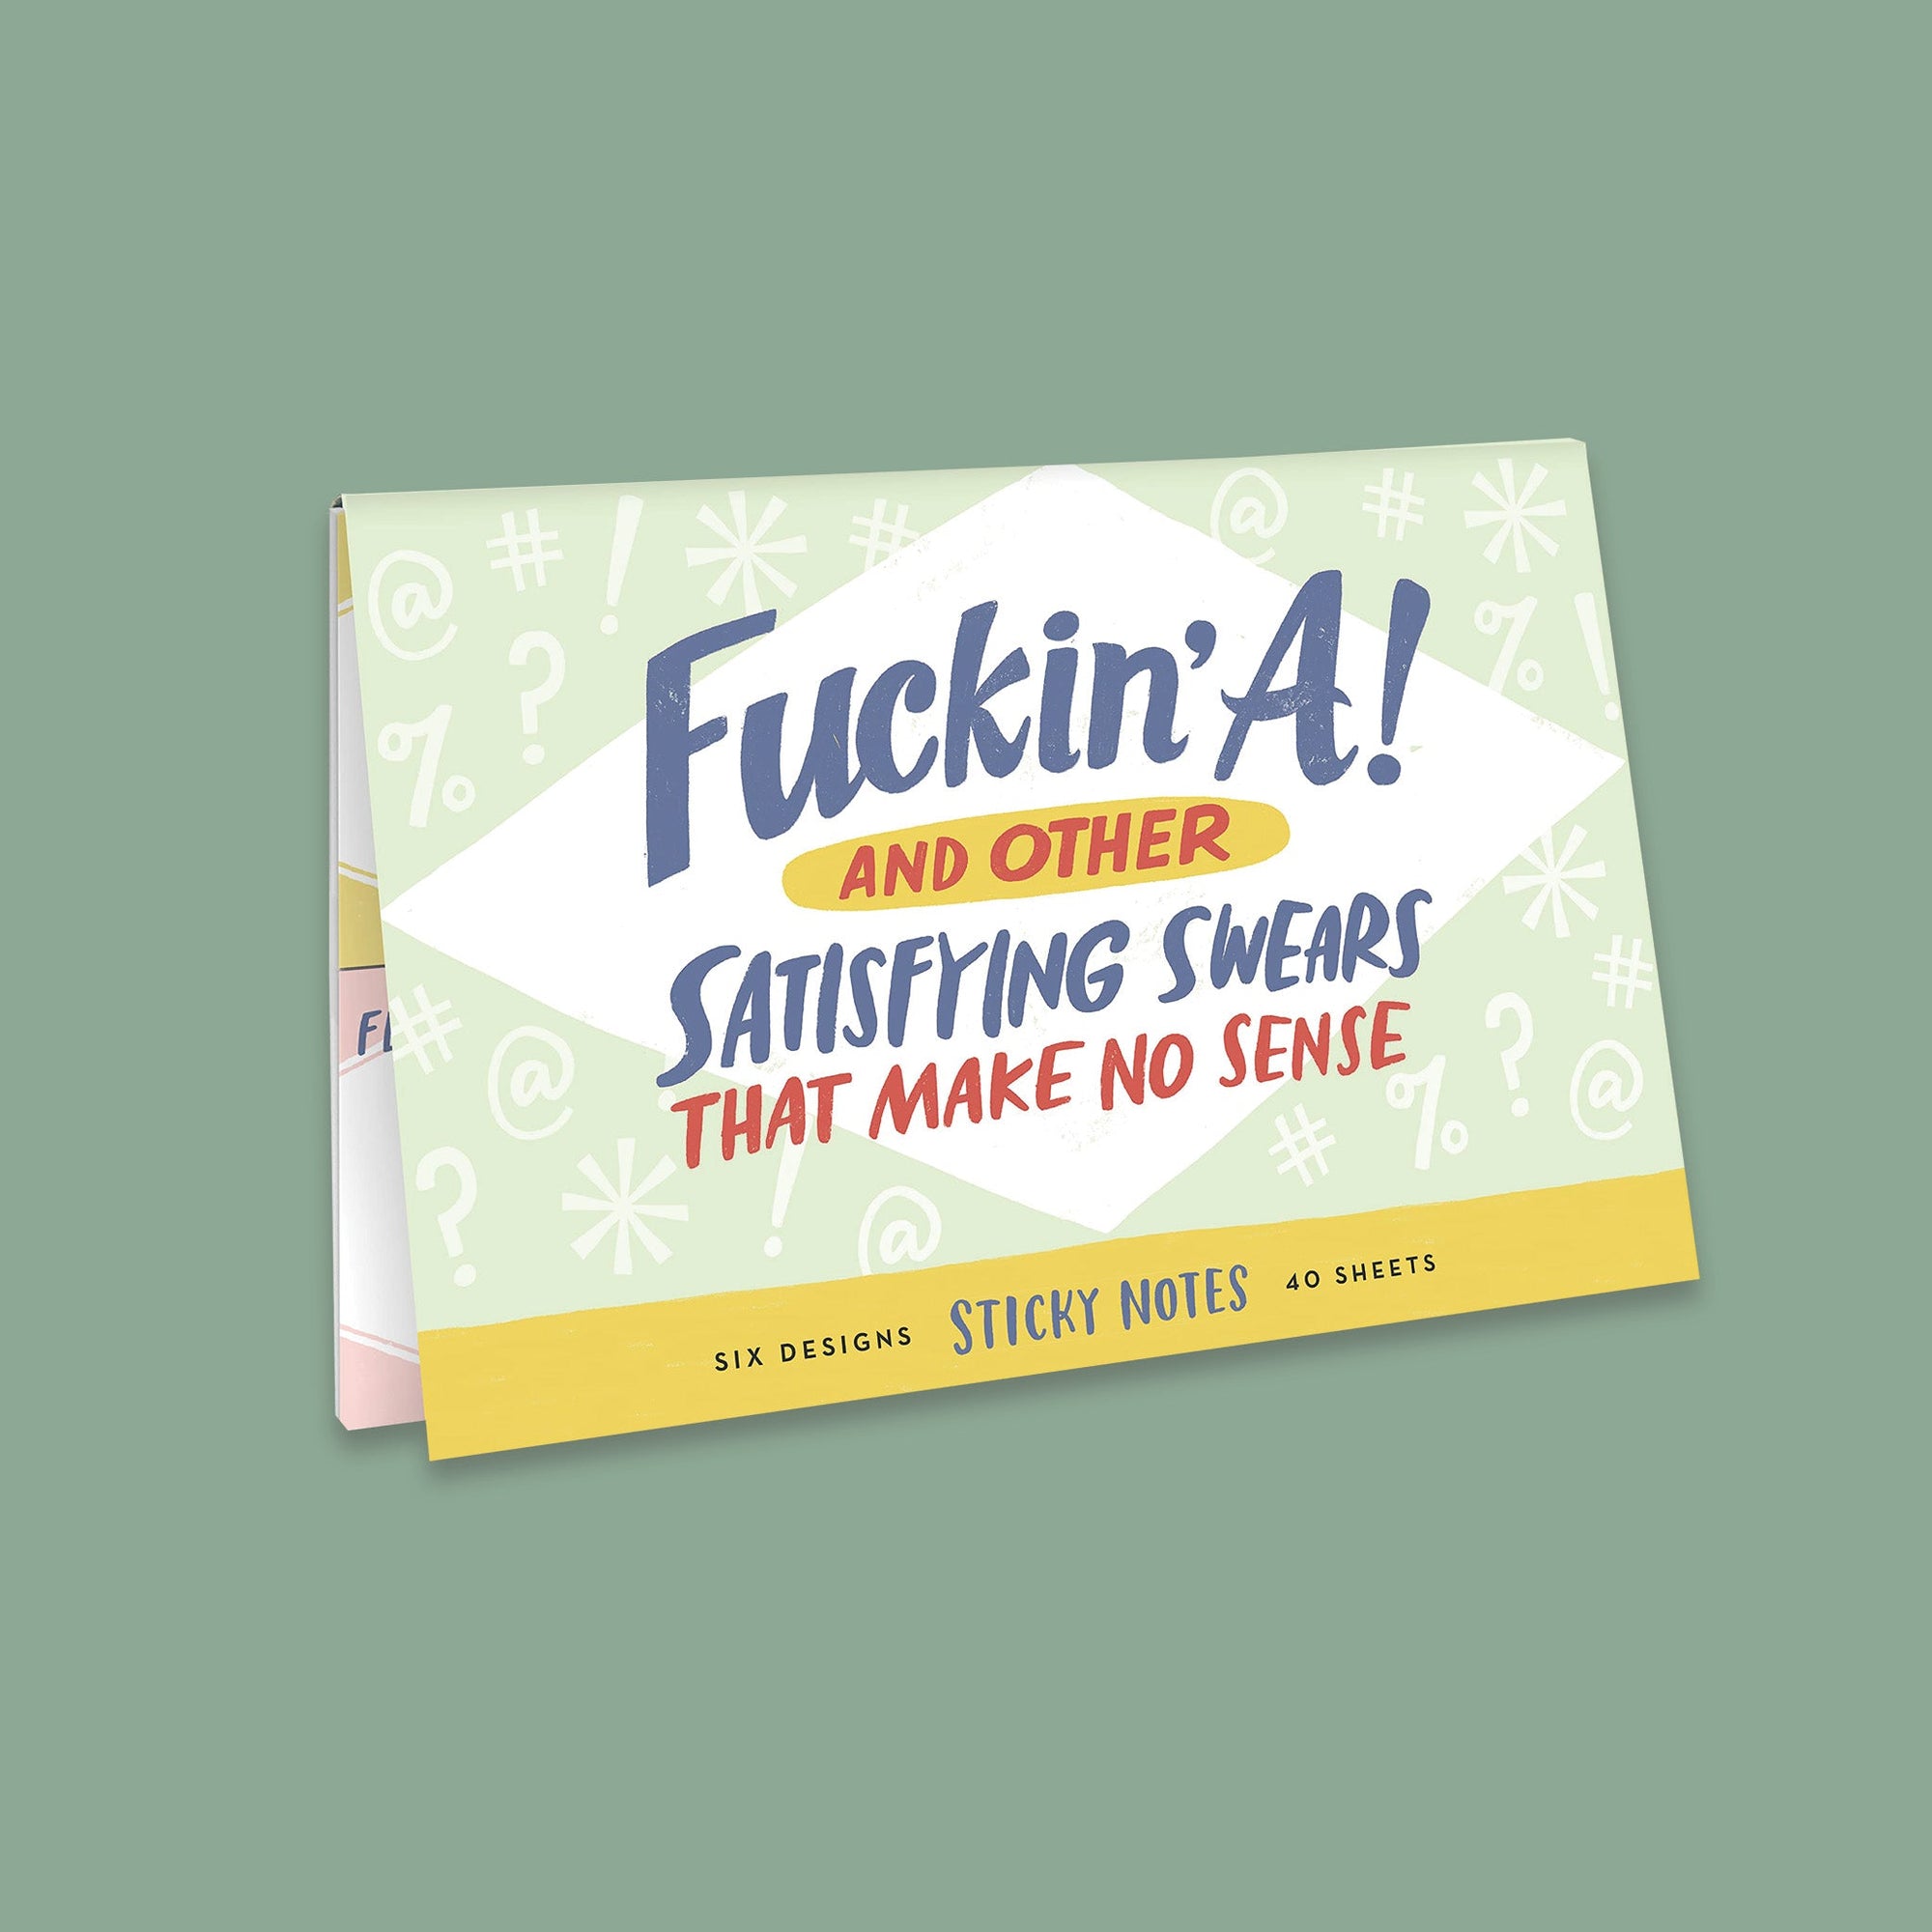 On a moss green background sits a packet. This is a close-up of a light green packet of sticky notes that has white illustrations of typing symbols. It says "Fuckin' A! AND OTHER SATISFYING SWEARS THAT MAKE NO SENSE" in handwritten lettering. The colors of the lettering are navy, light yellow, and white. On the bottom it says "SIX DESIGNS STICKY NOTES 40 SHEETS" in navy, handwritten lettering.